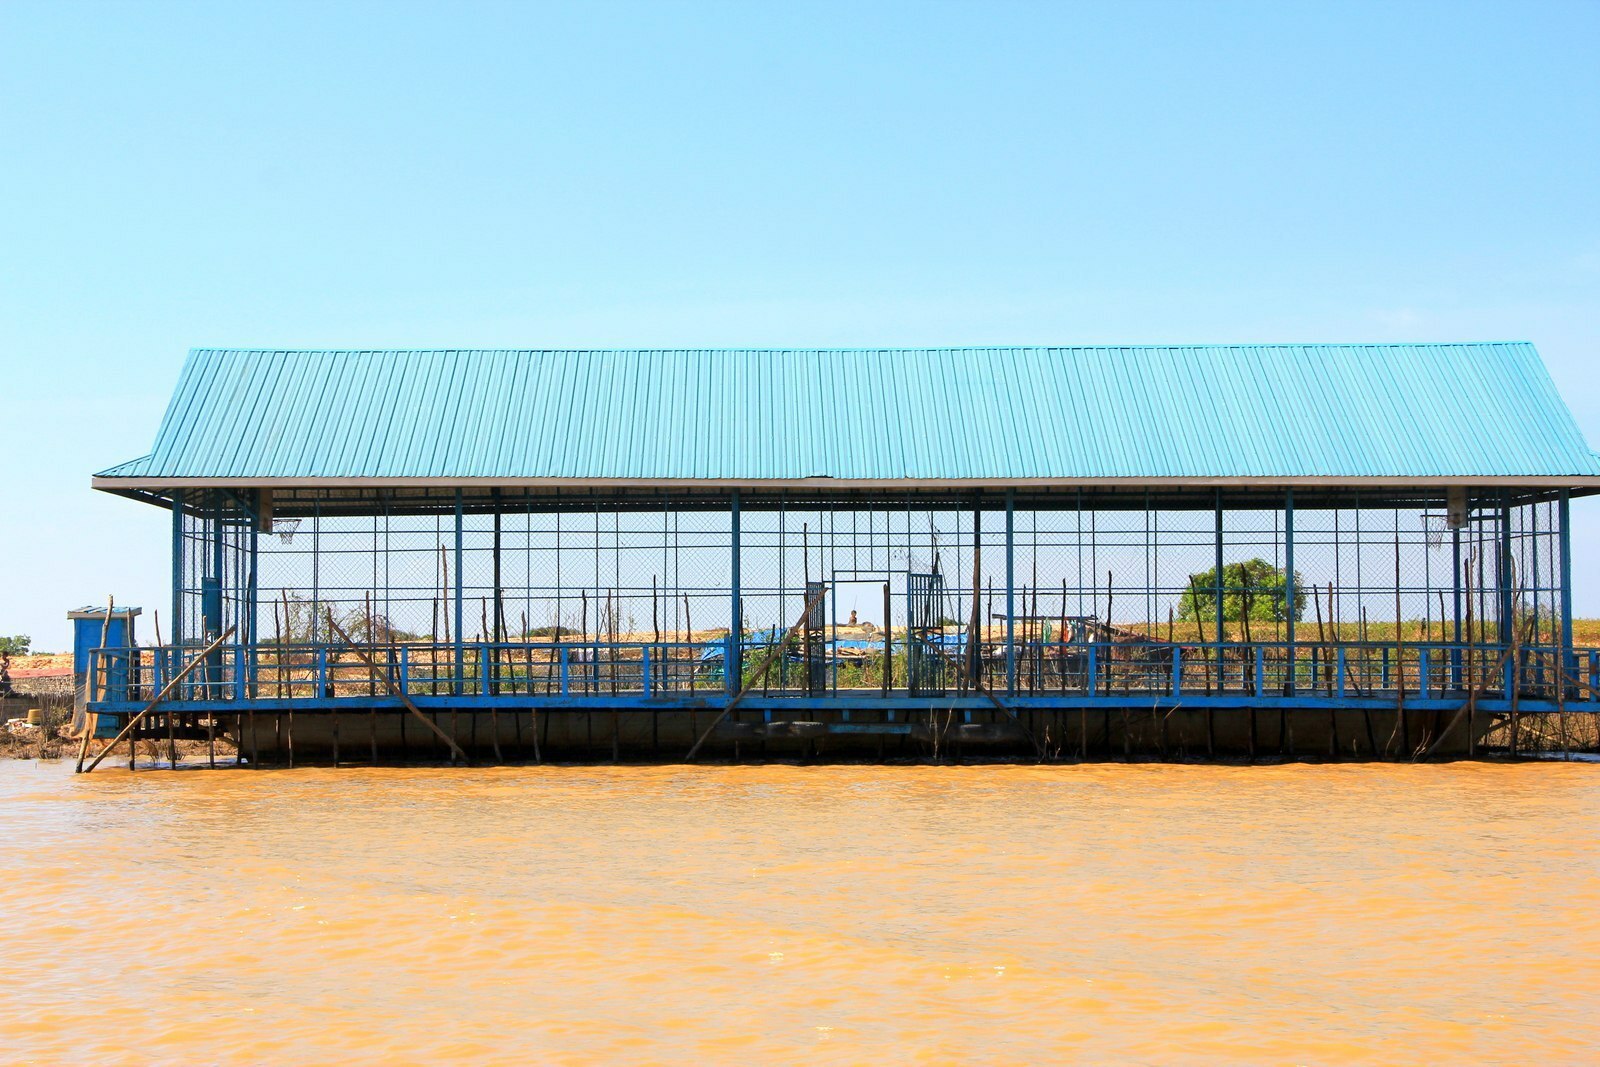 2 A Floating Basketball Court Cambodia